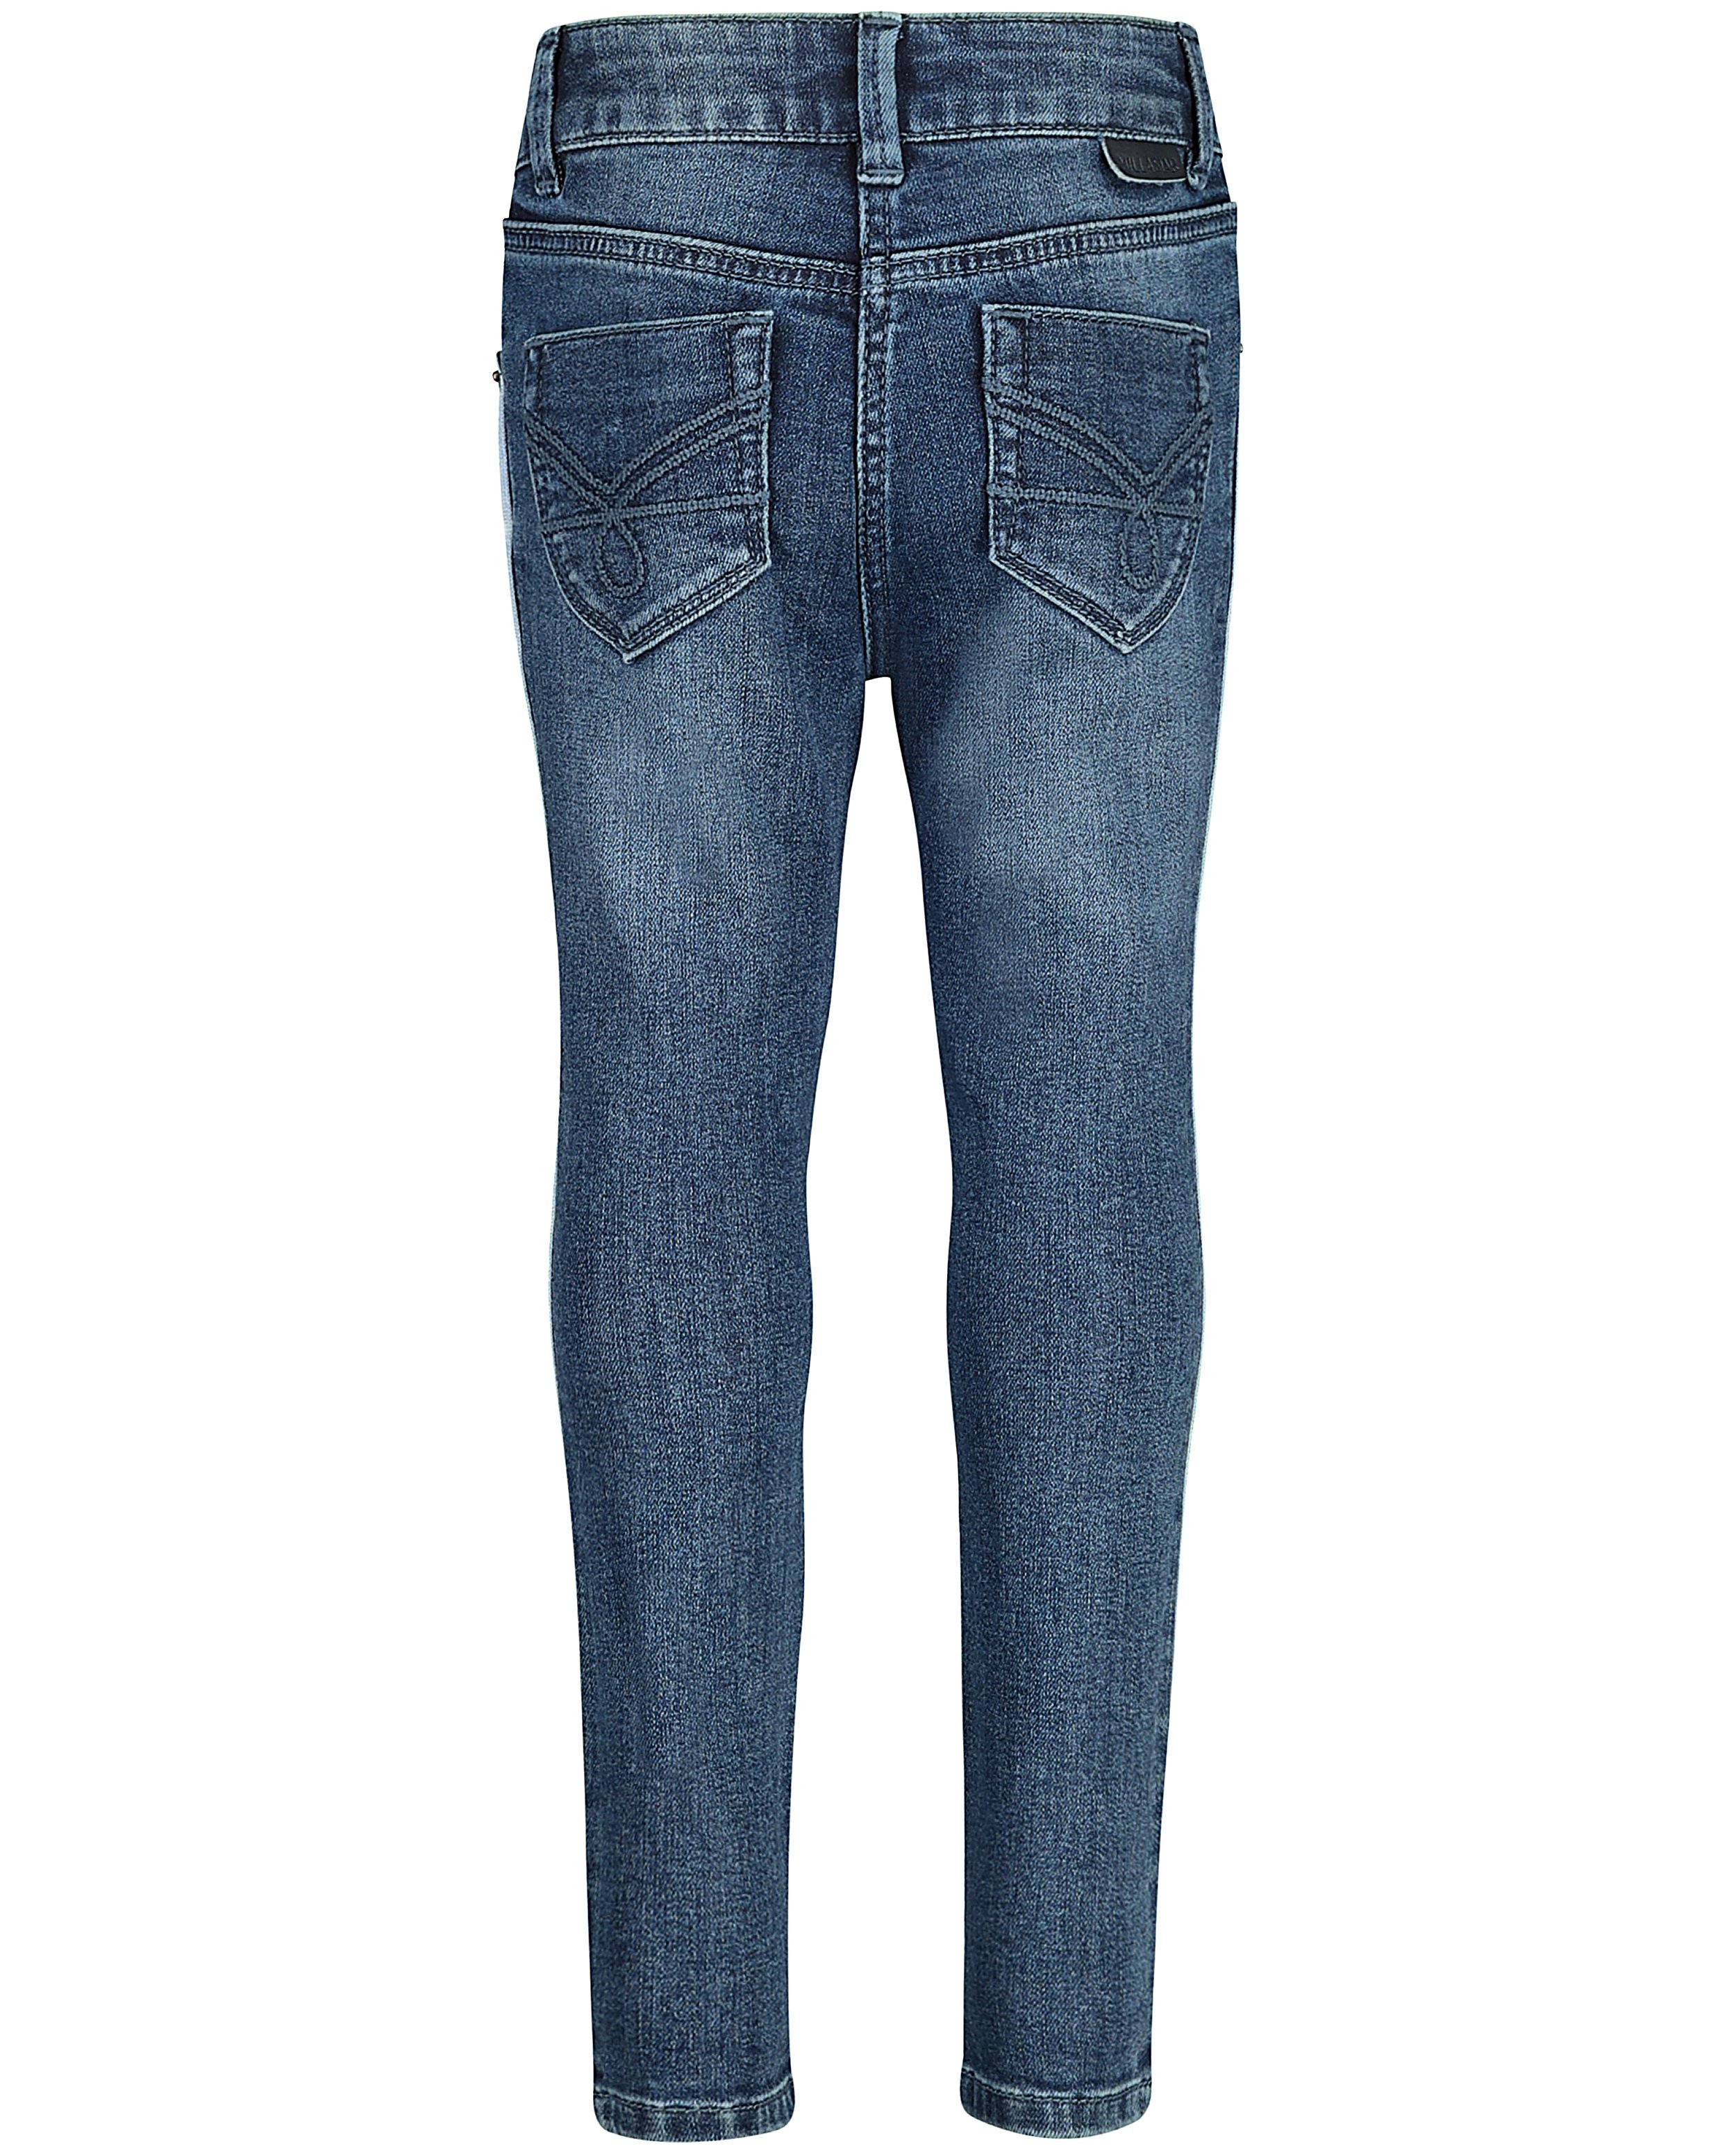 Jeans - Washed skinny jeans